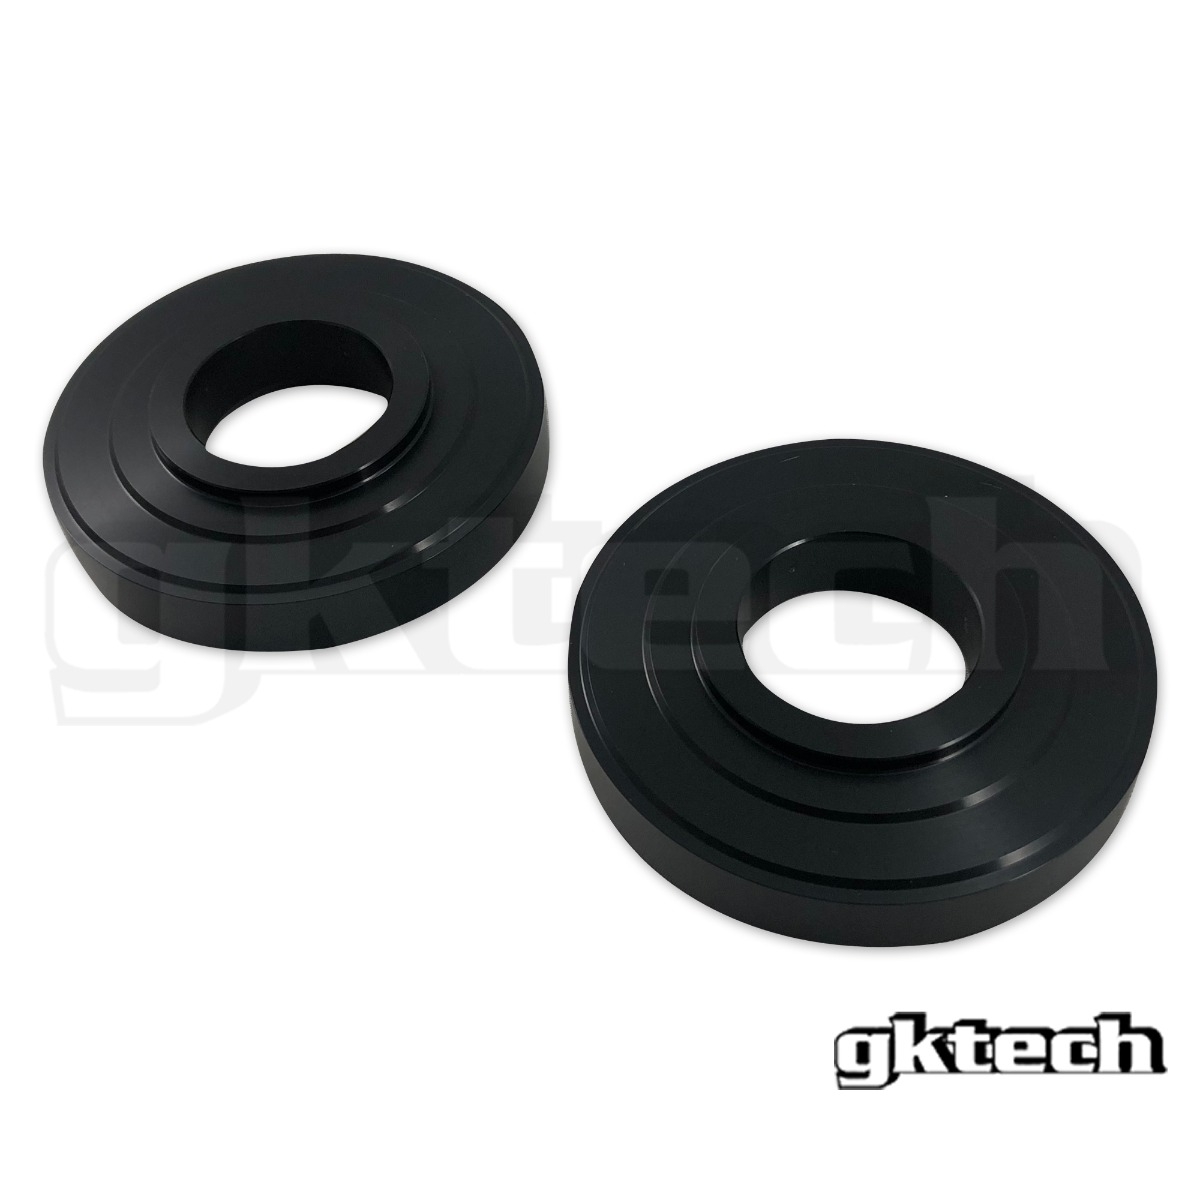 GKTech V2 Axle Spacers Pair - Nissan Skyline R32 R33 R34, 300ZX Z32, 240SX S13 S14 S15